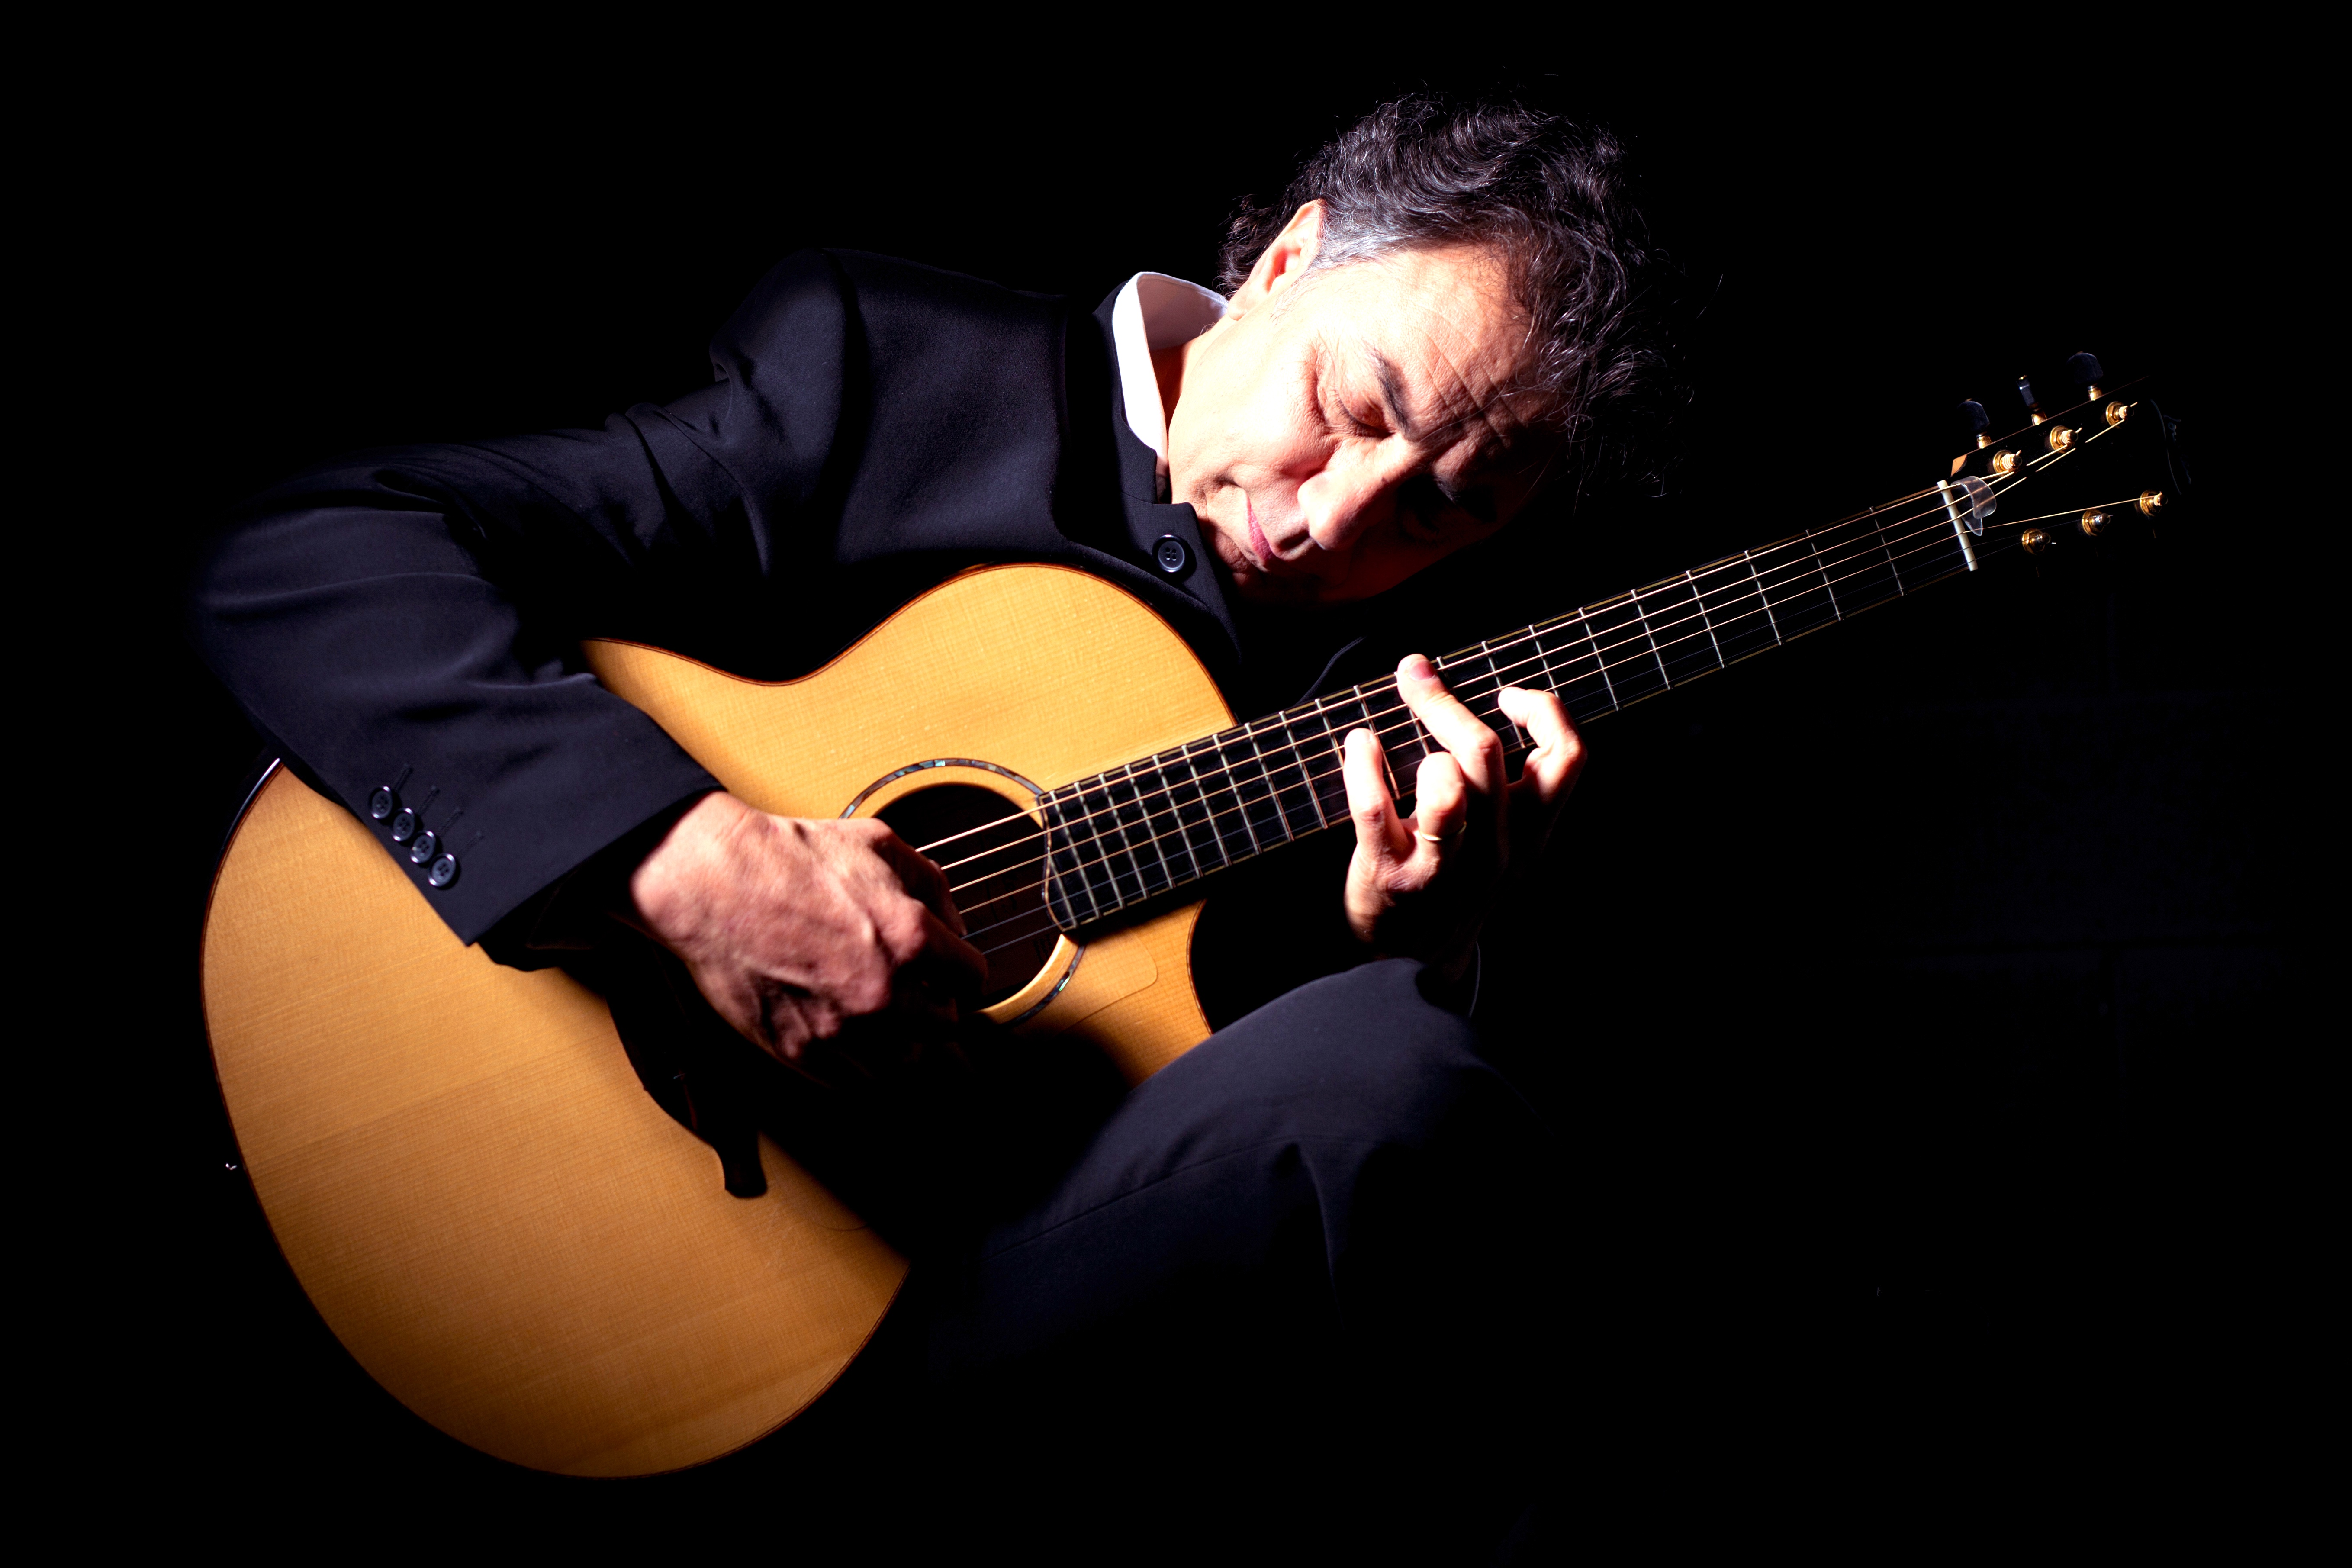 The Axe and Fiddle presents master acoustic guitar player Pierre Bensusan from France, passing through on his 2017 USA Tour